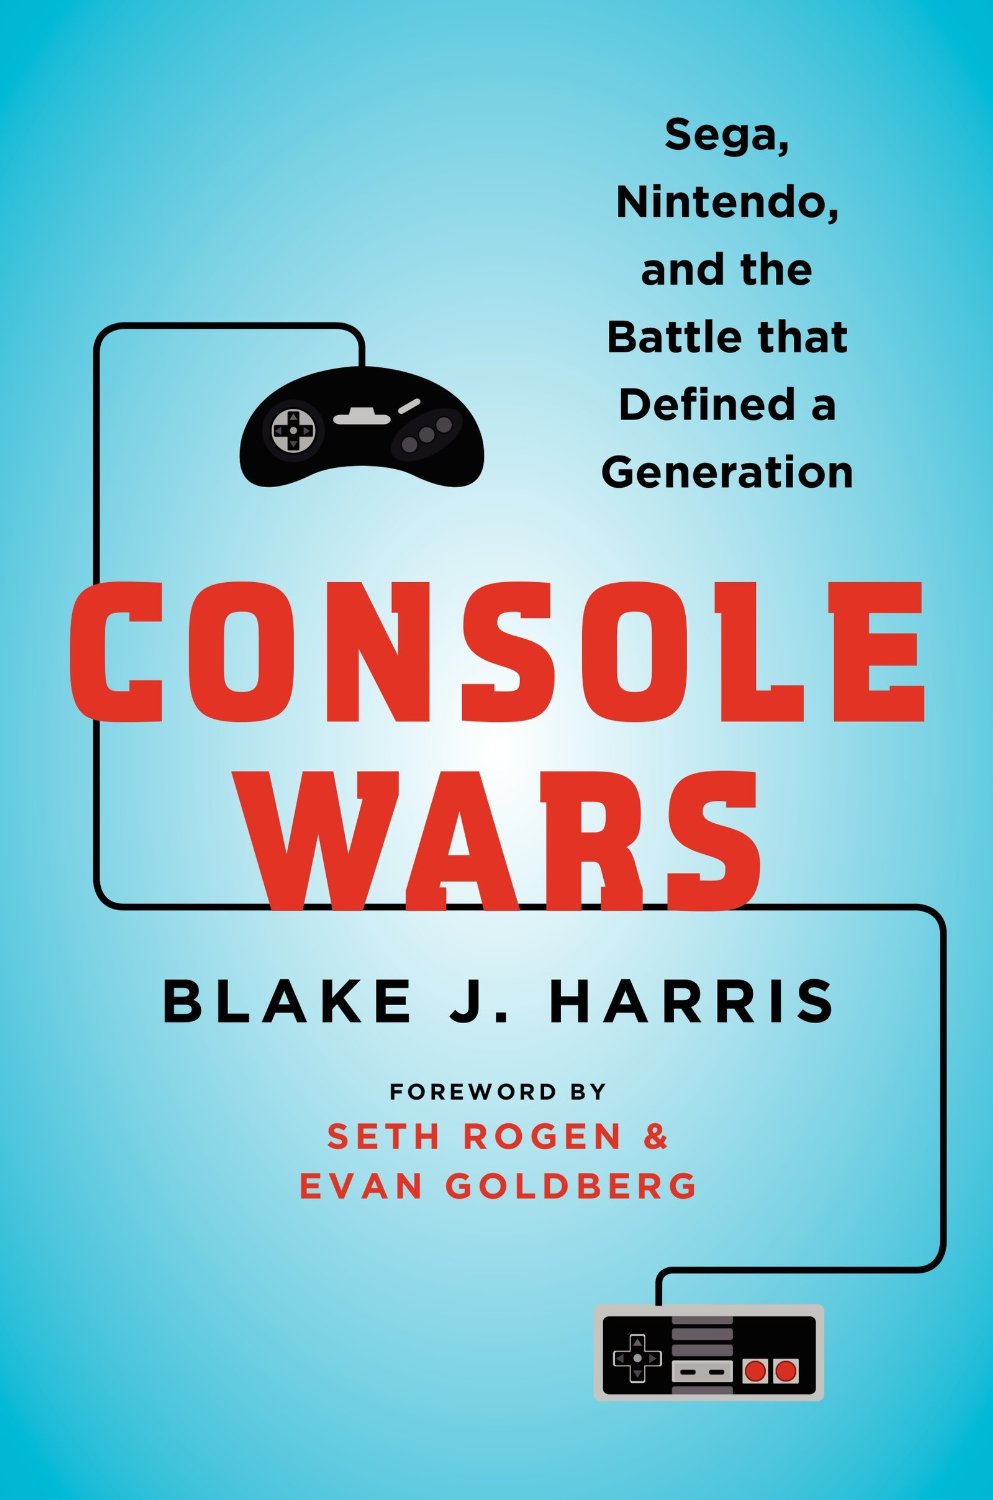 Console-Wars-Sega-Nintendo-and-the-Battle-that-Defined-a-Generation